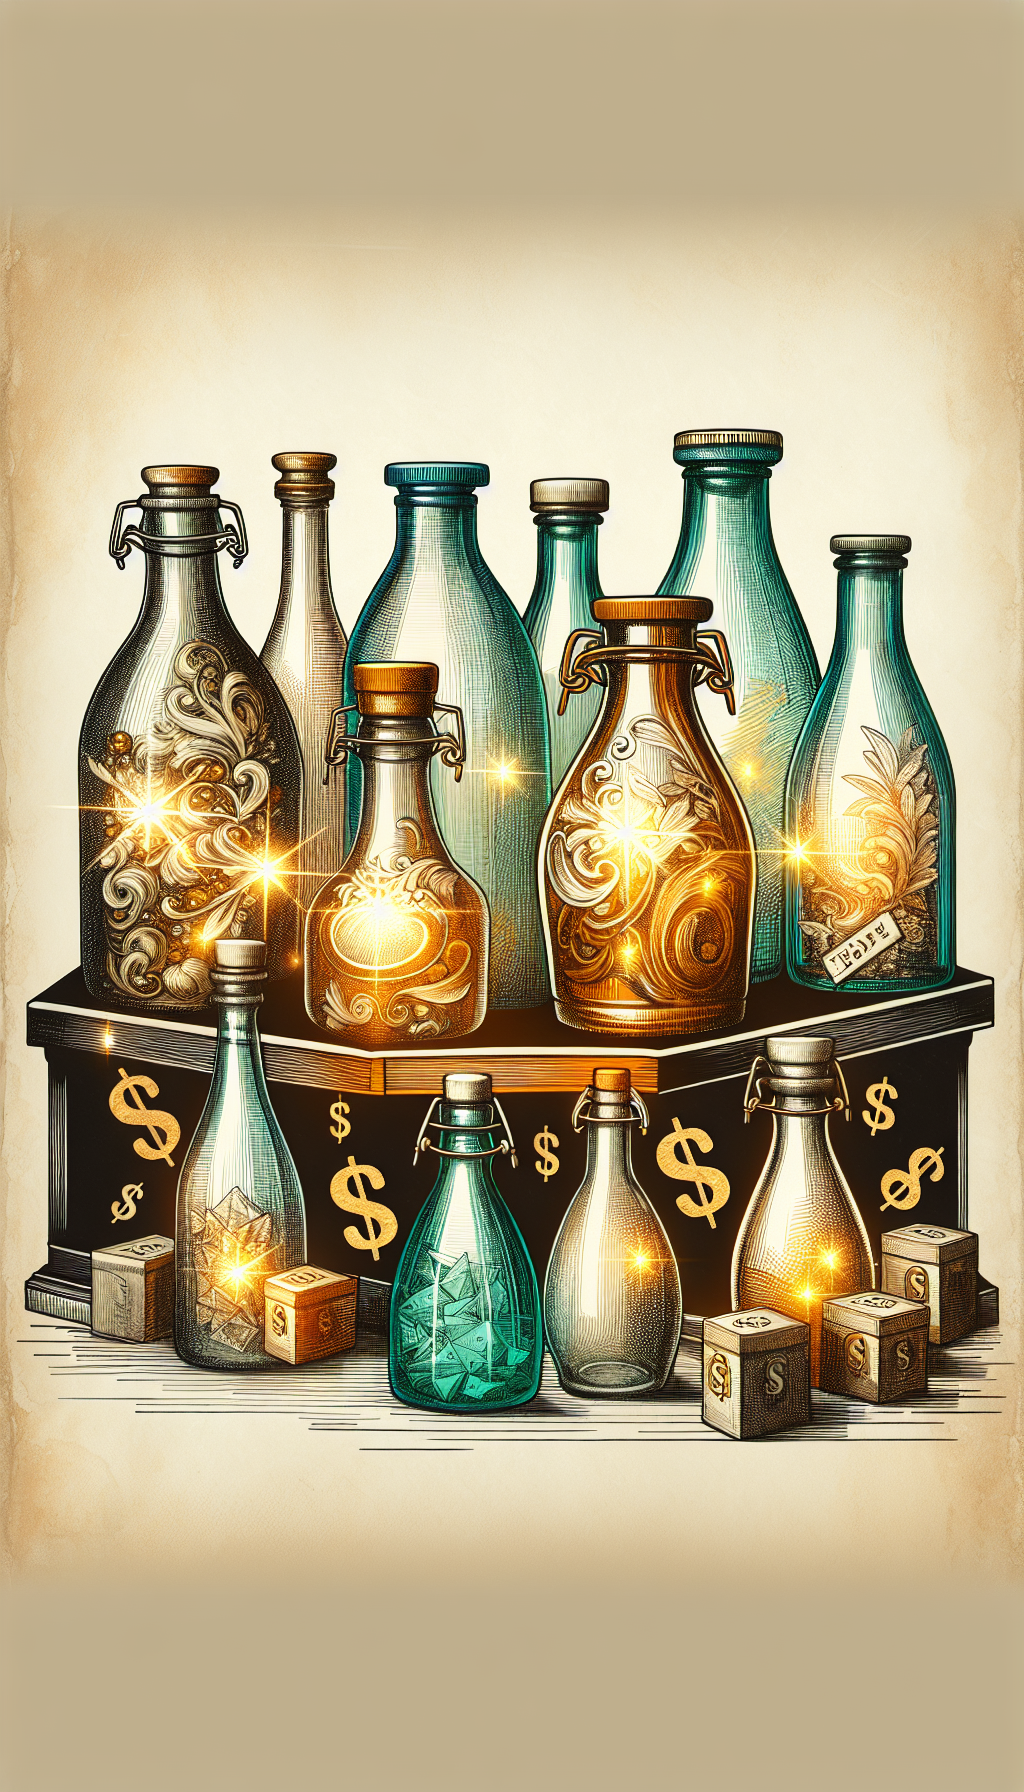 A vintage-inspired collage features old milk bottles of varying shapes and colors, with shimmering golden highlights and price tags floating above each, hinting at their high values. The richest, rarest bottles are perched atop a pedestal, spotlighted like precious gems in a museum. The eclectic drawing style mixes photorealism for the bottles with whimsical, hand-drawn currency symbols and dollar signs swirling around.